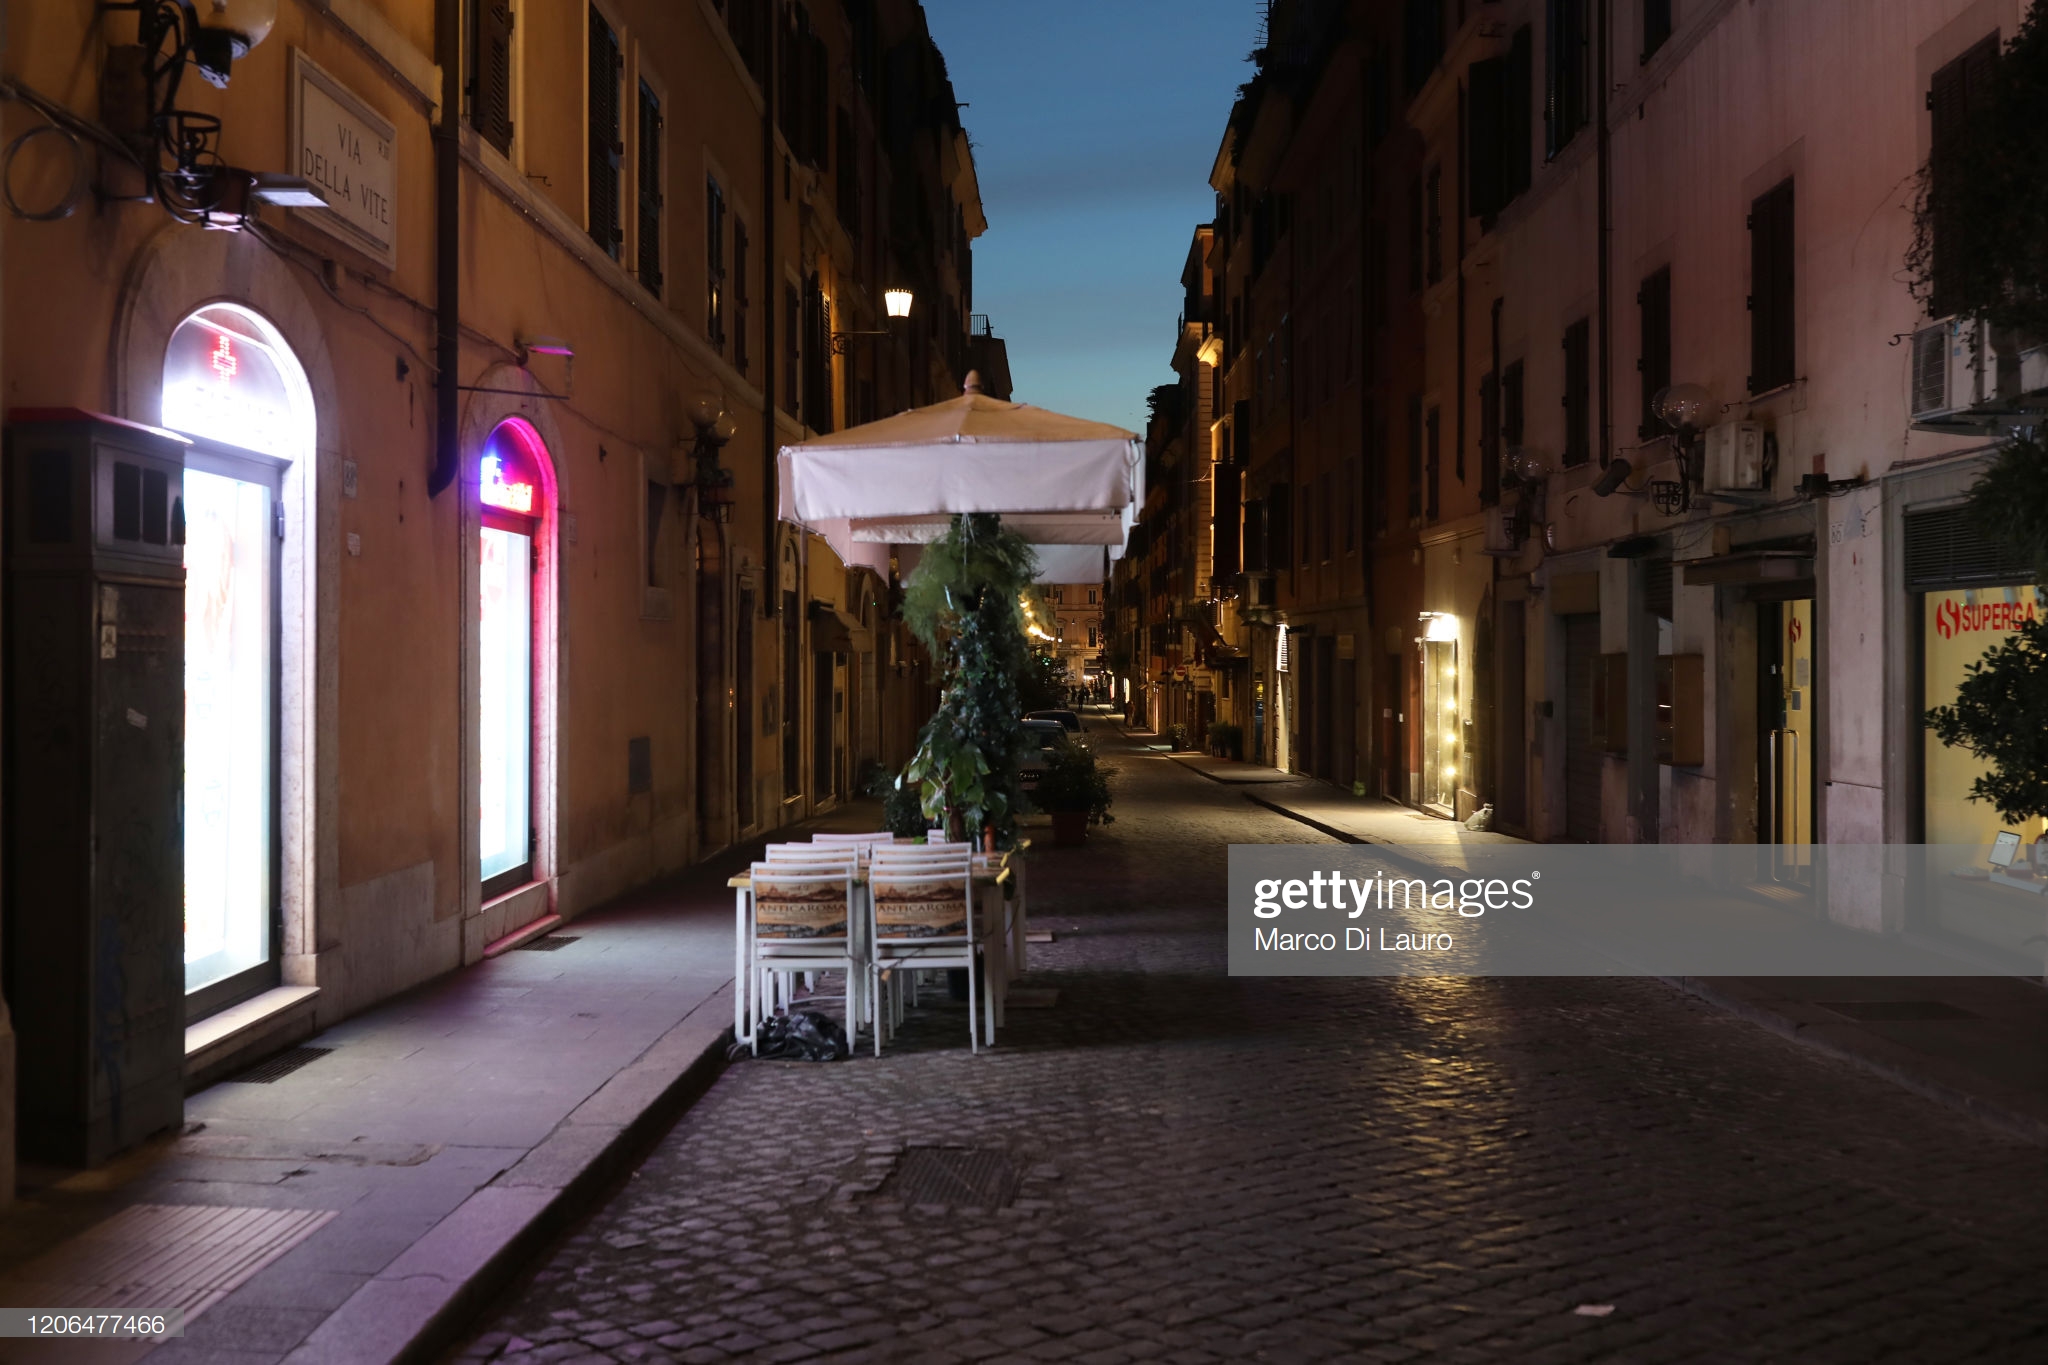 street-in-the-city-center-is-seen-empty-on-march-10-2020-in-rome-the-picture-id1206477466